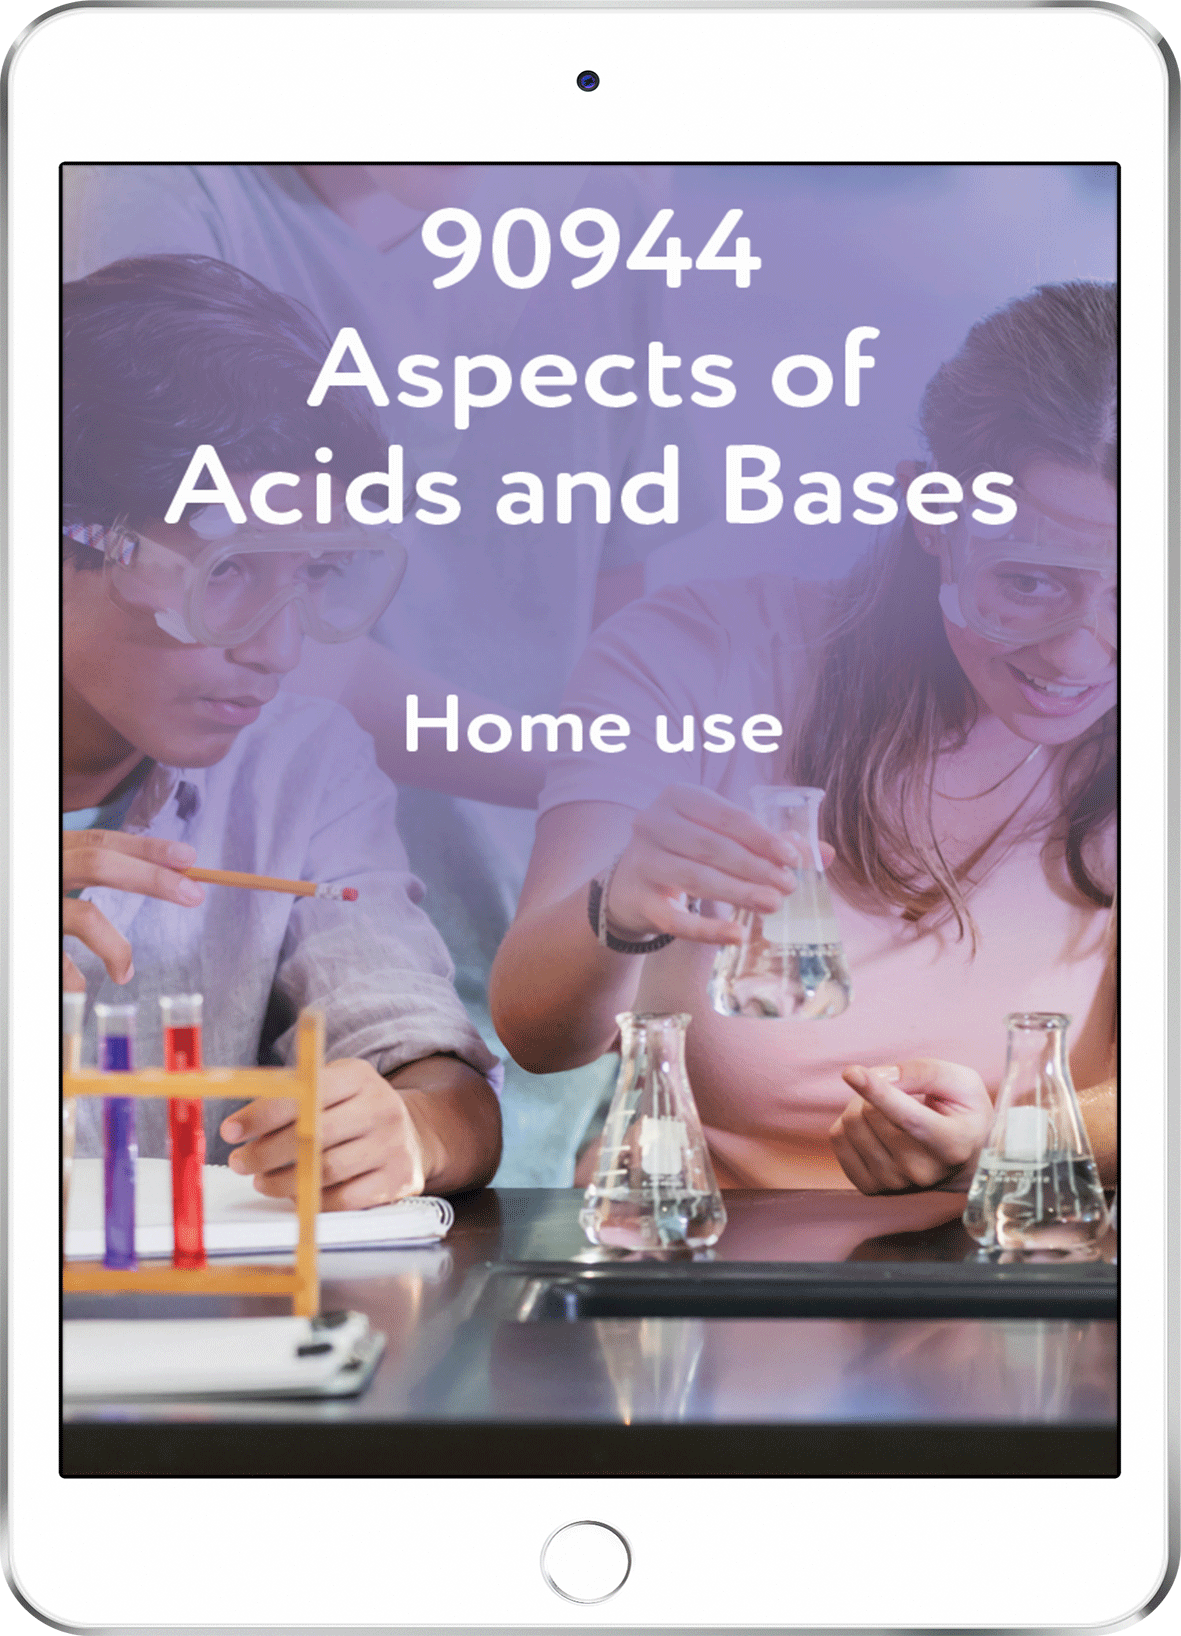 90944 Aspects of Acids and Bases - Home Use